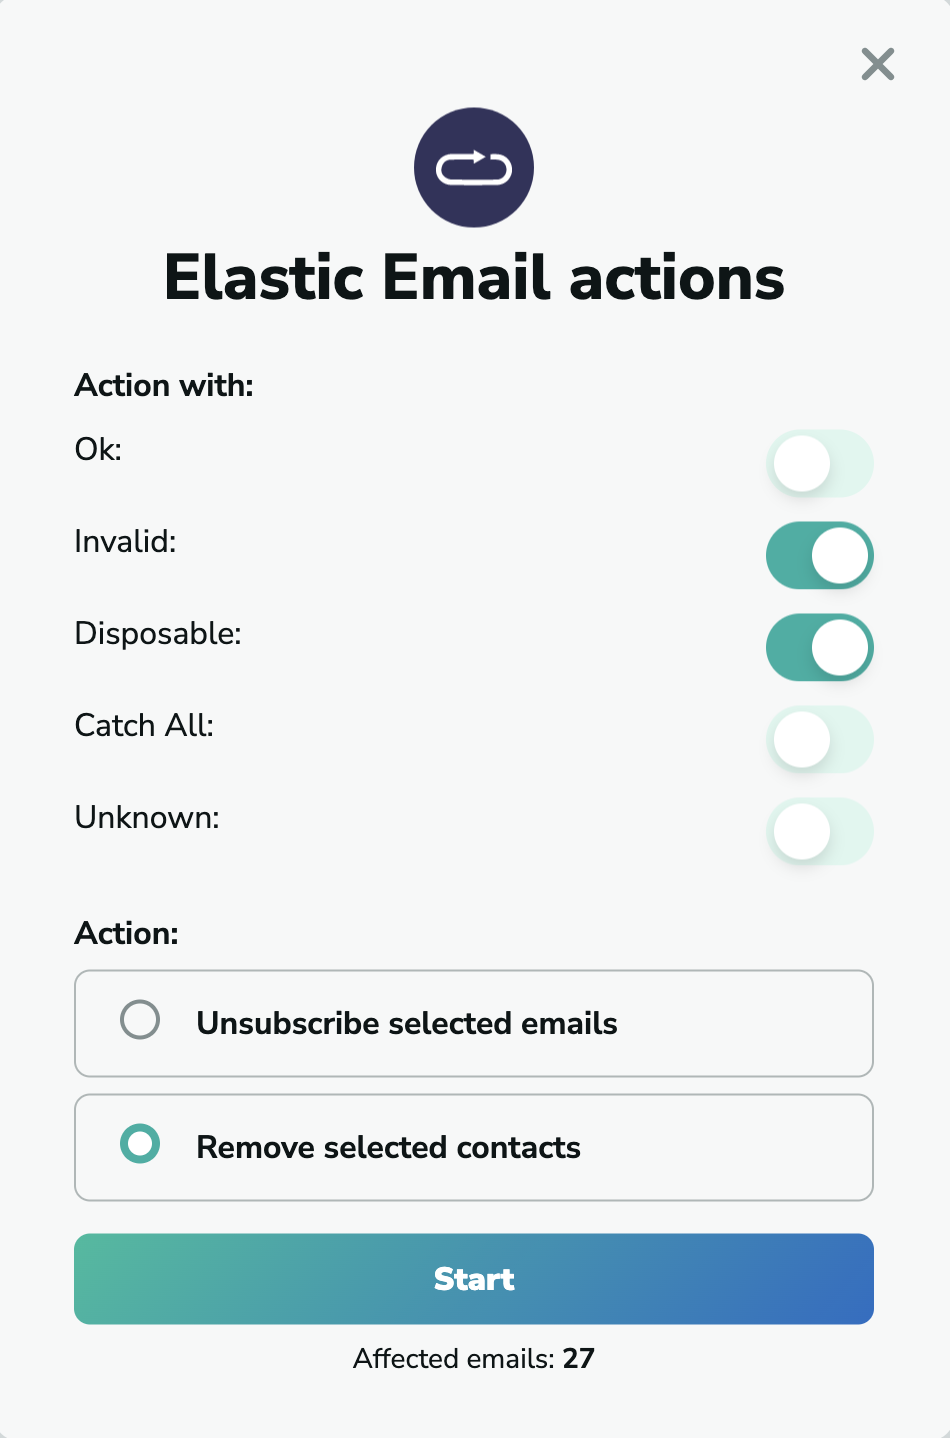 Elastic Email remove contacts in MillionVerifier